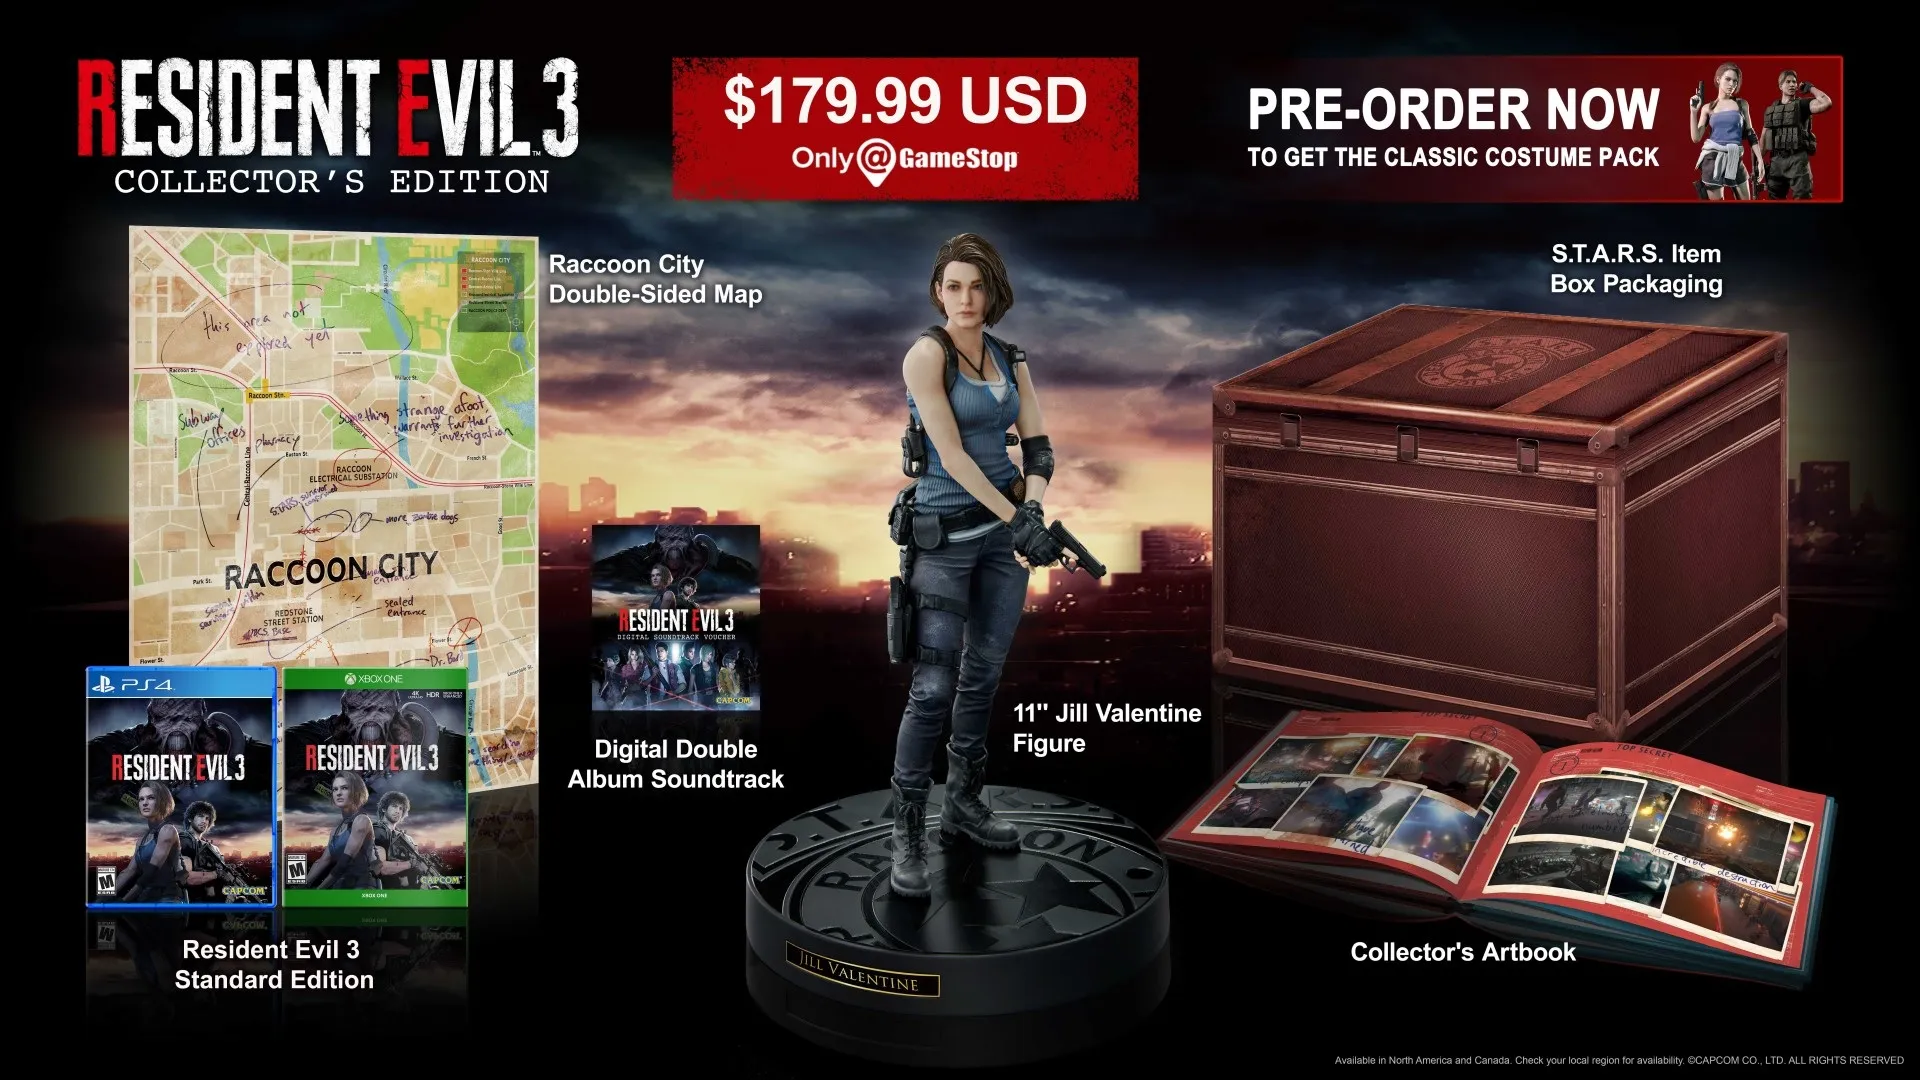 180 Resident Evil 3 Collectors Edition Will Only Be At Gamestop